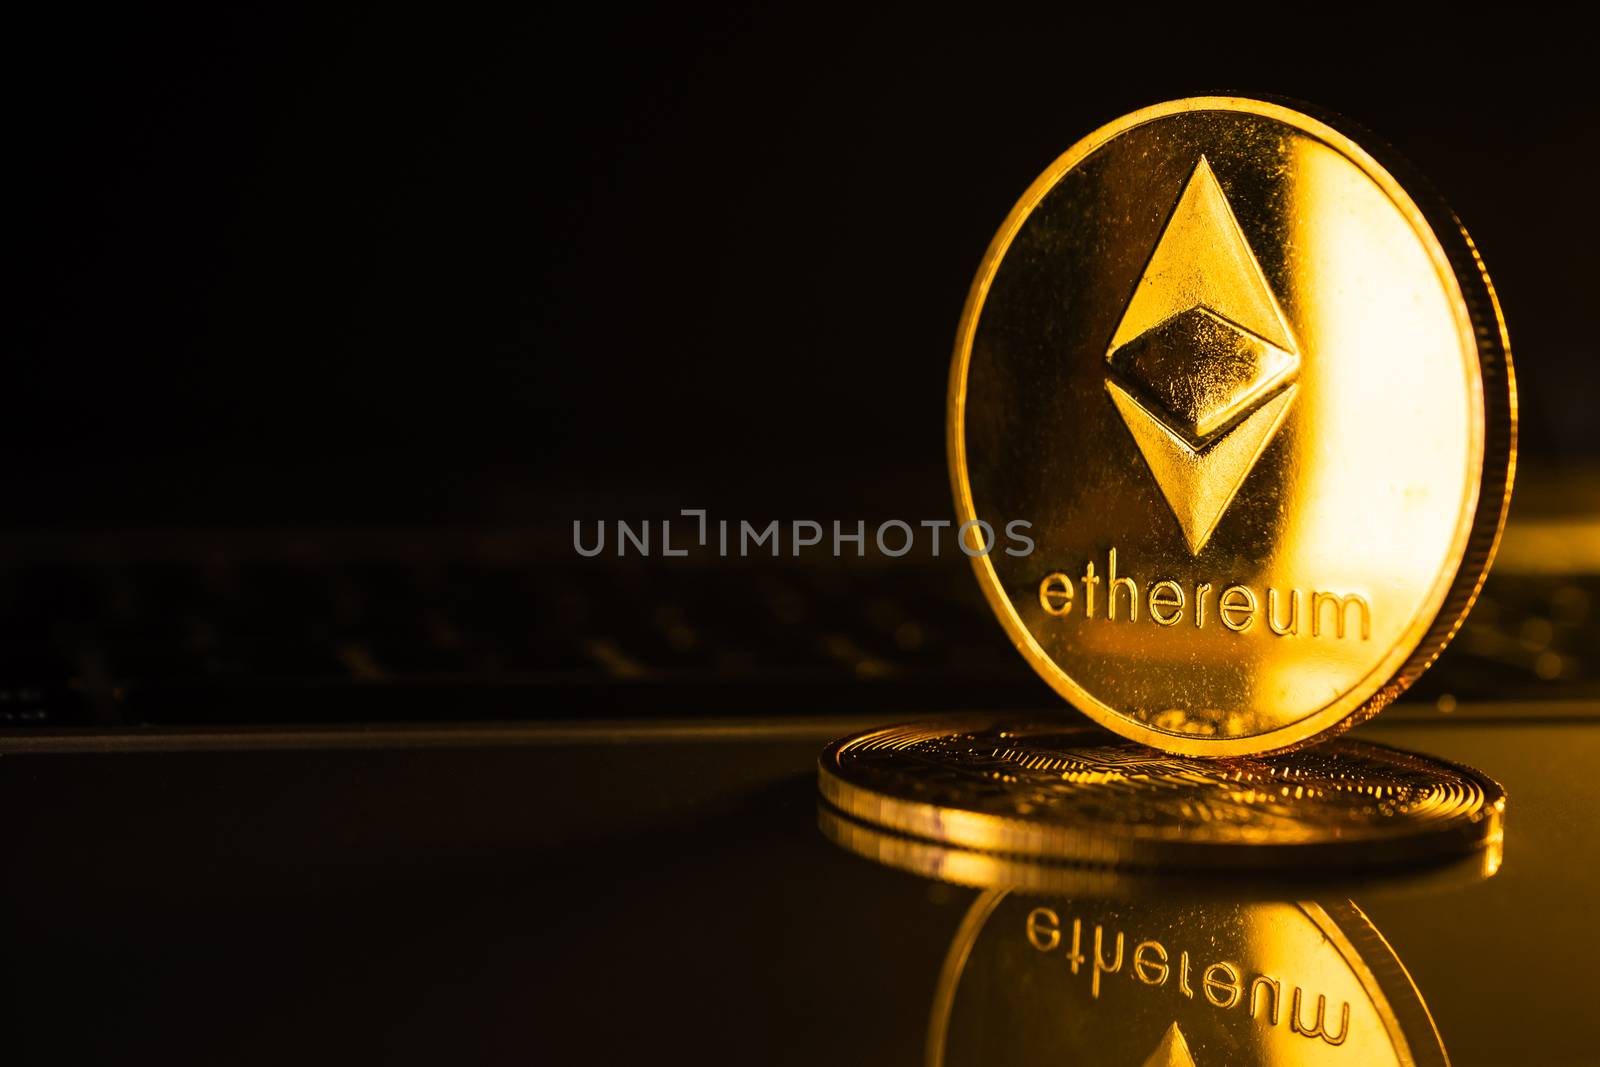 Golden coins with ethereum symbol on computer.